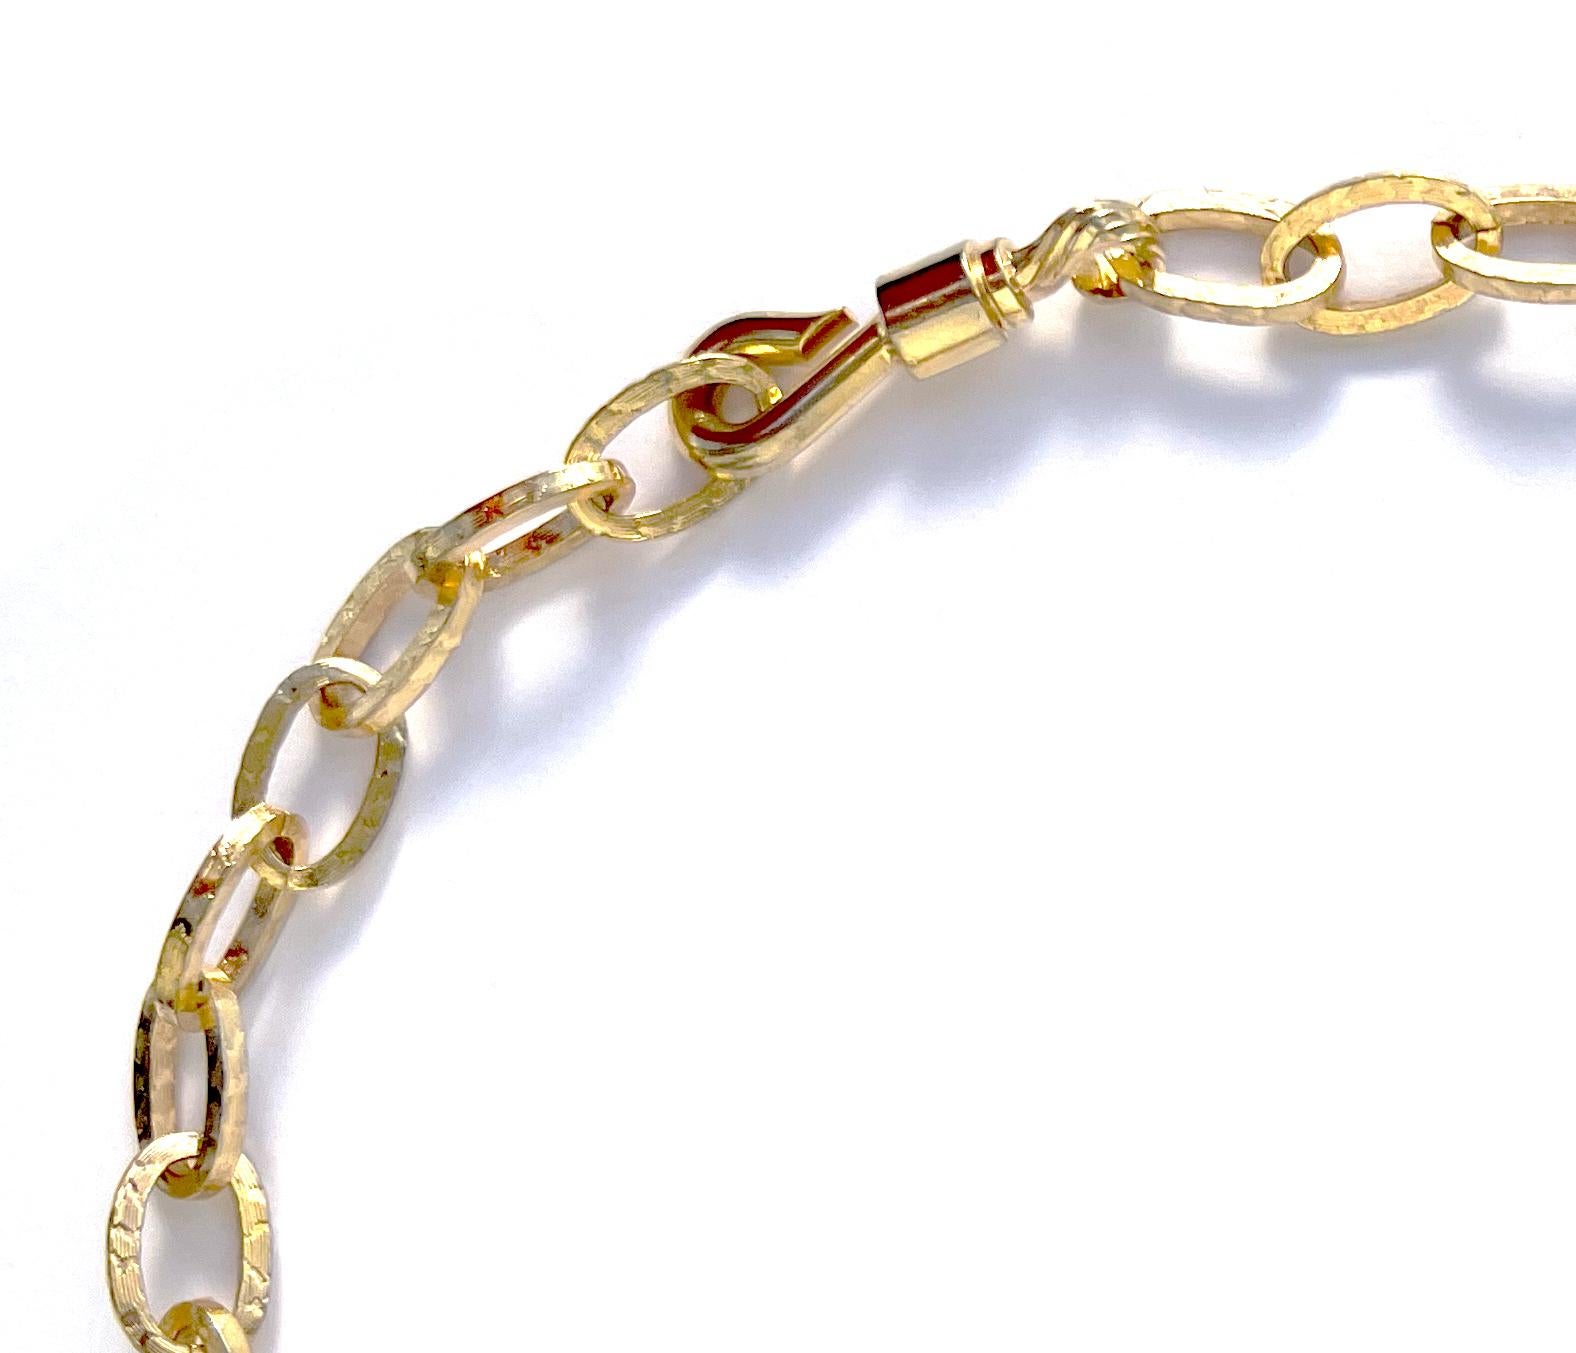 Vintage Christian Dior Long Chain Necklace with Hook Details, 1972 In Good Condition For Sale In London, GB